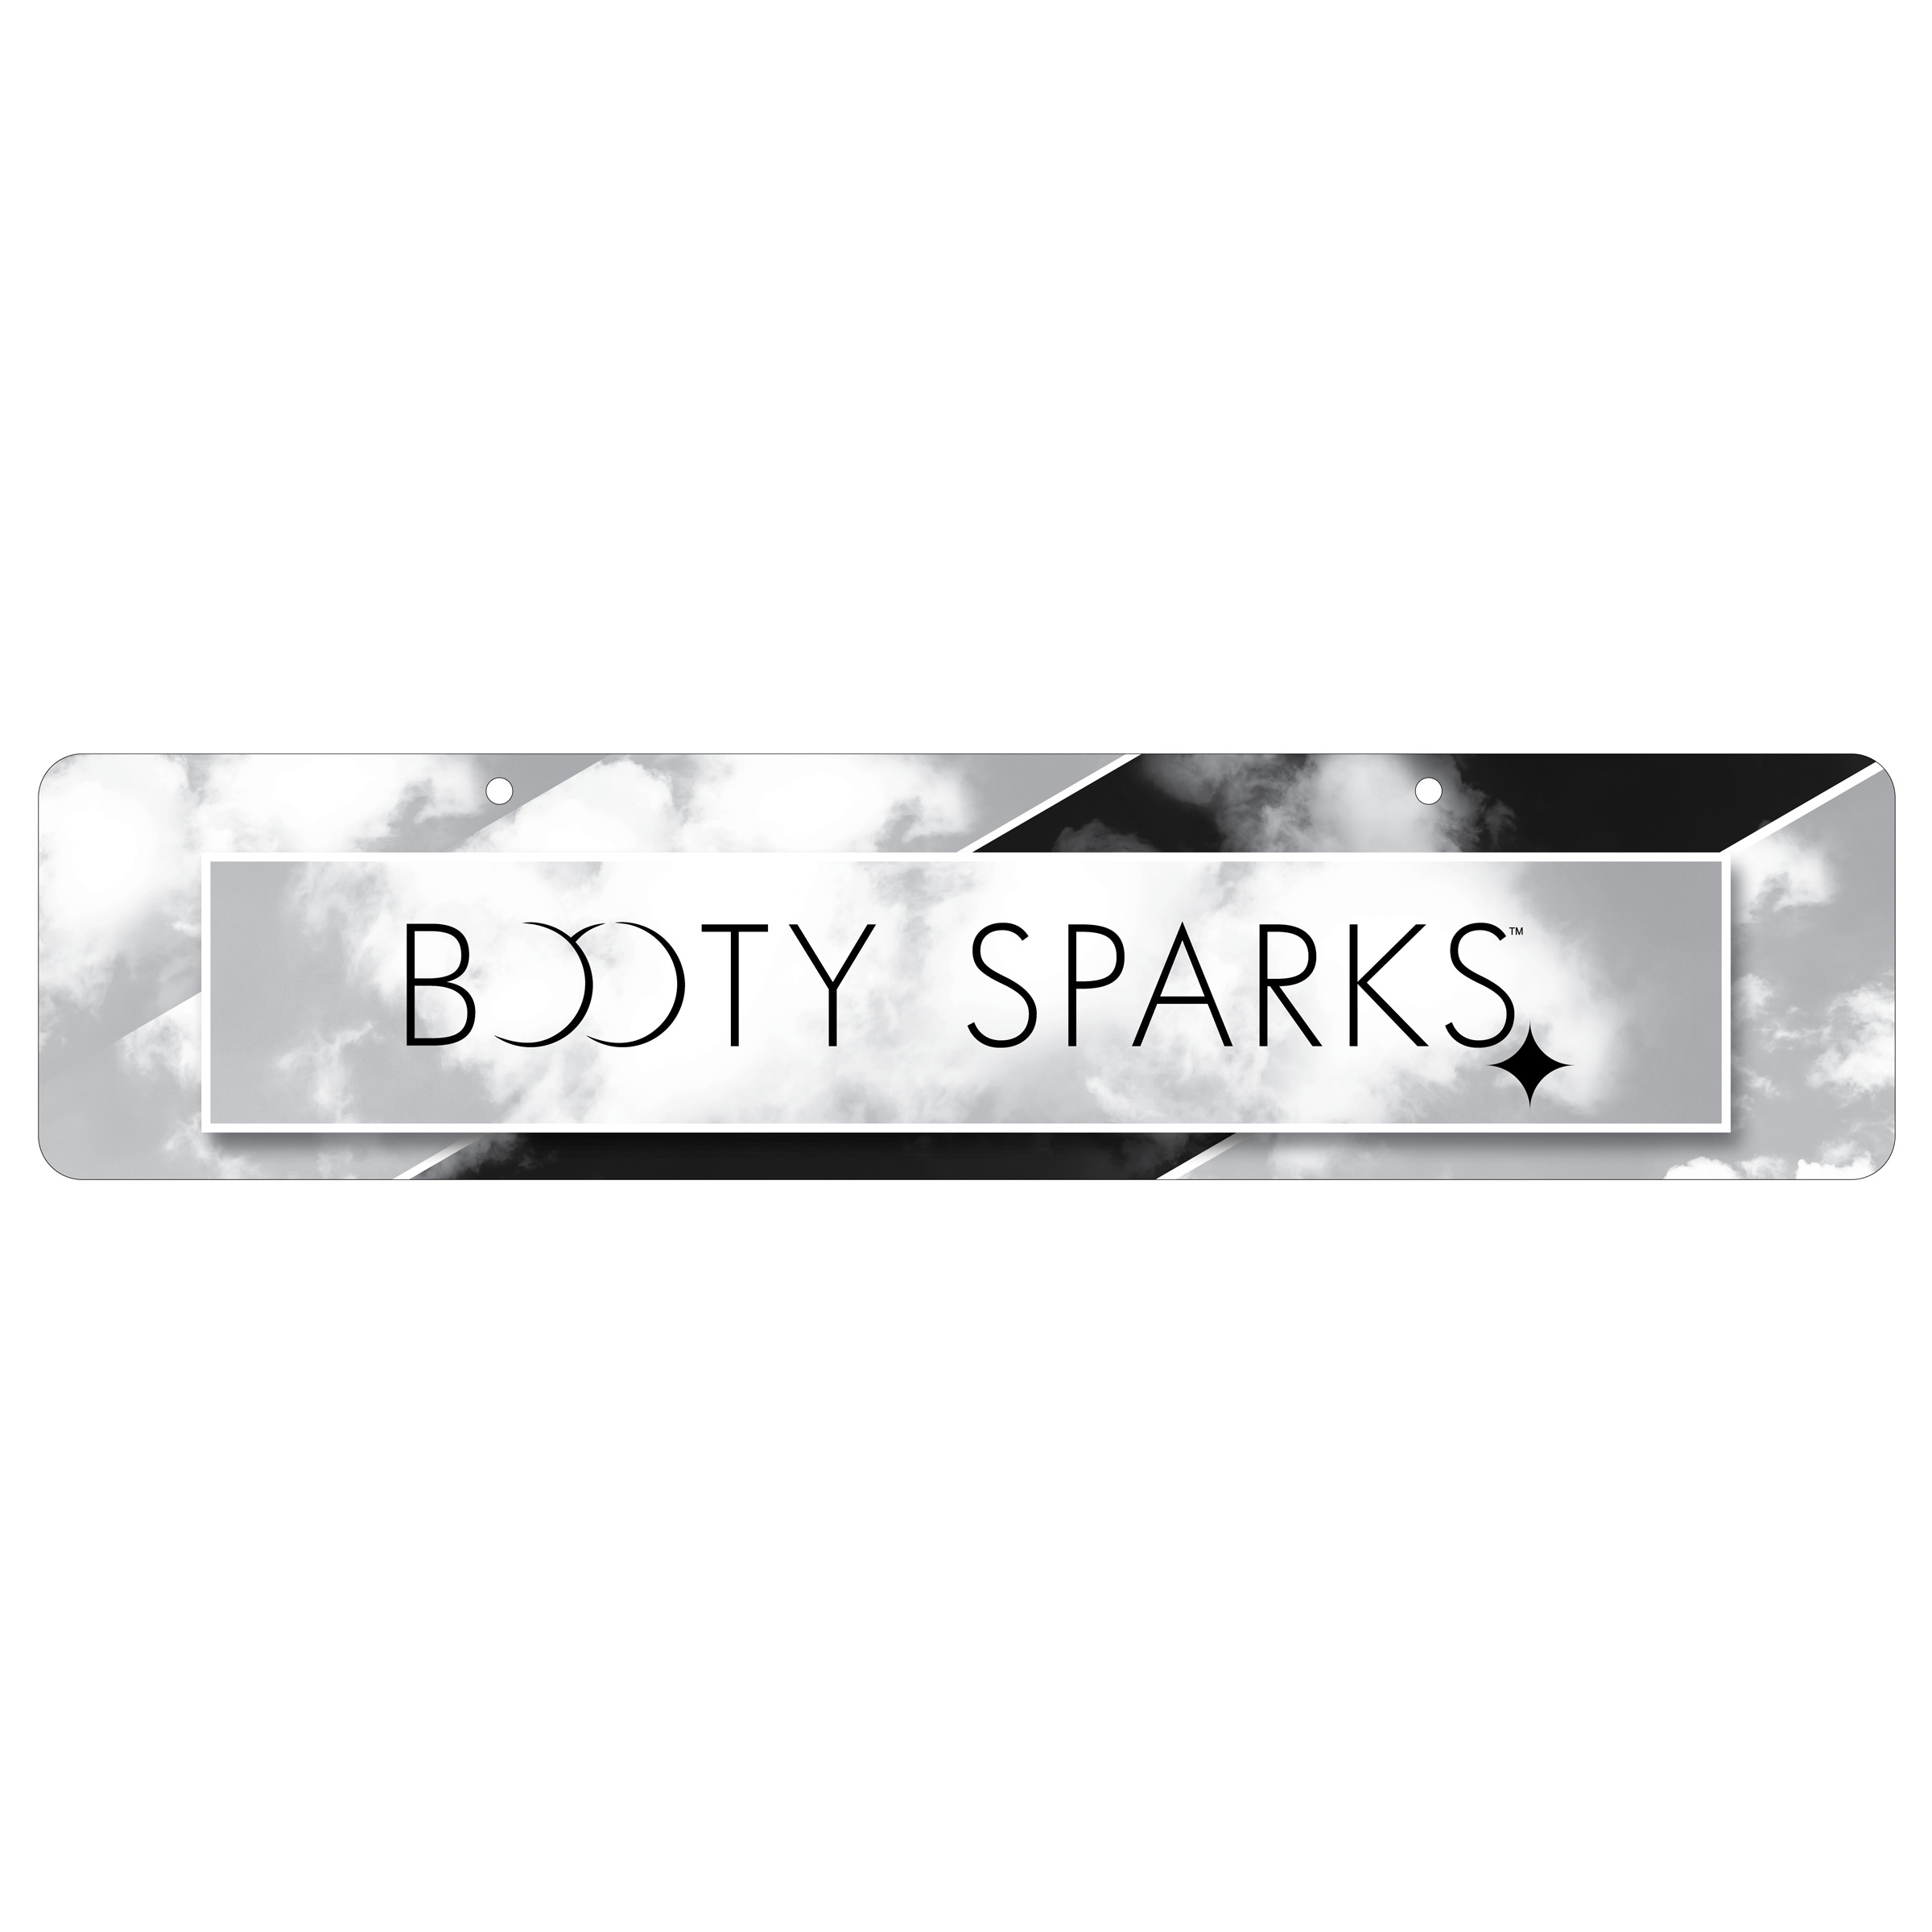 Cap off your Booty Sparks display with an attractive and functional planogram banner. Printed on heavy cardstock